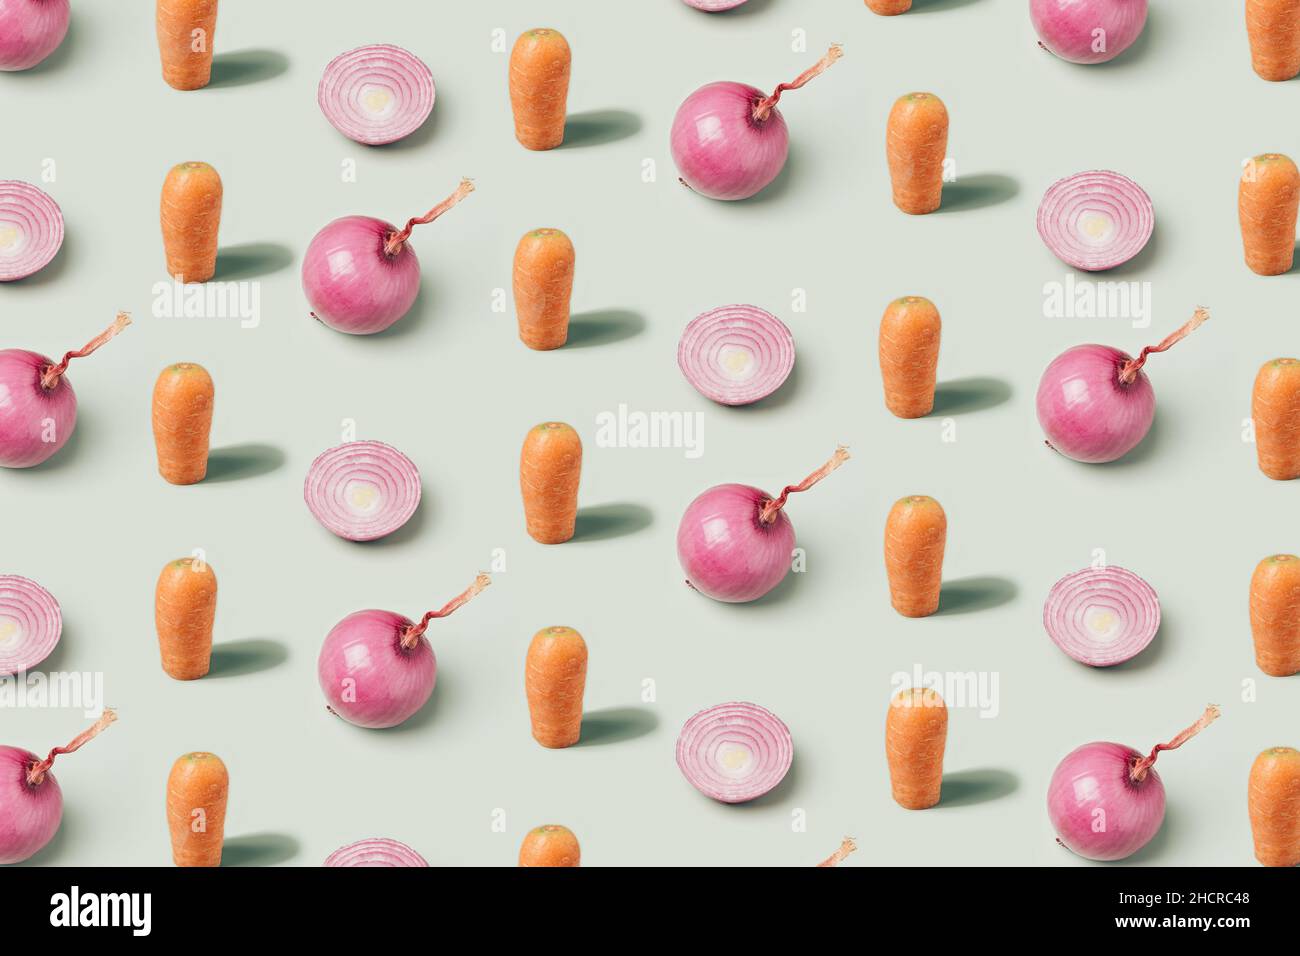 Carrots and red onions arranged on a pastel green background. Vegan diet minimal pattern Stock Photo